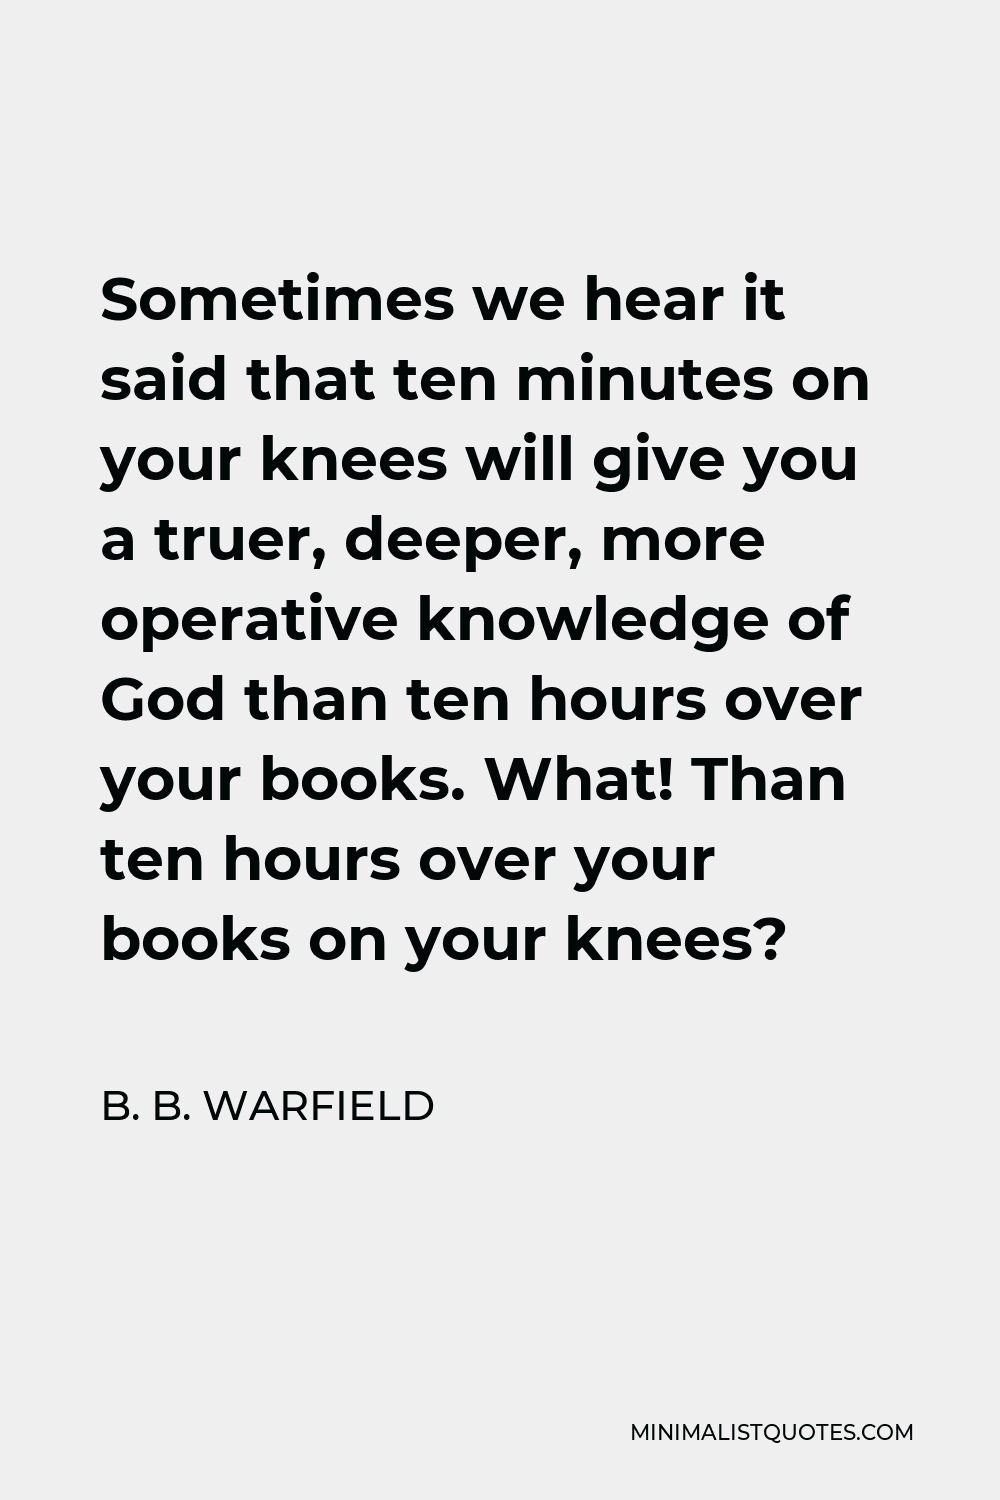 B. B. Warfield Quote - Sometimes we hear it said that ten minutes on your knees will give you a truer, deeper, more operative knowledge of God than ten hours over your books. What! Than ten hours over your books on your knees?